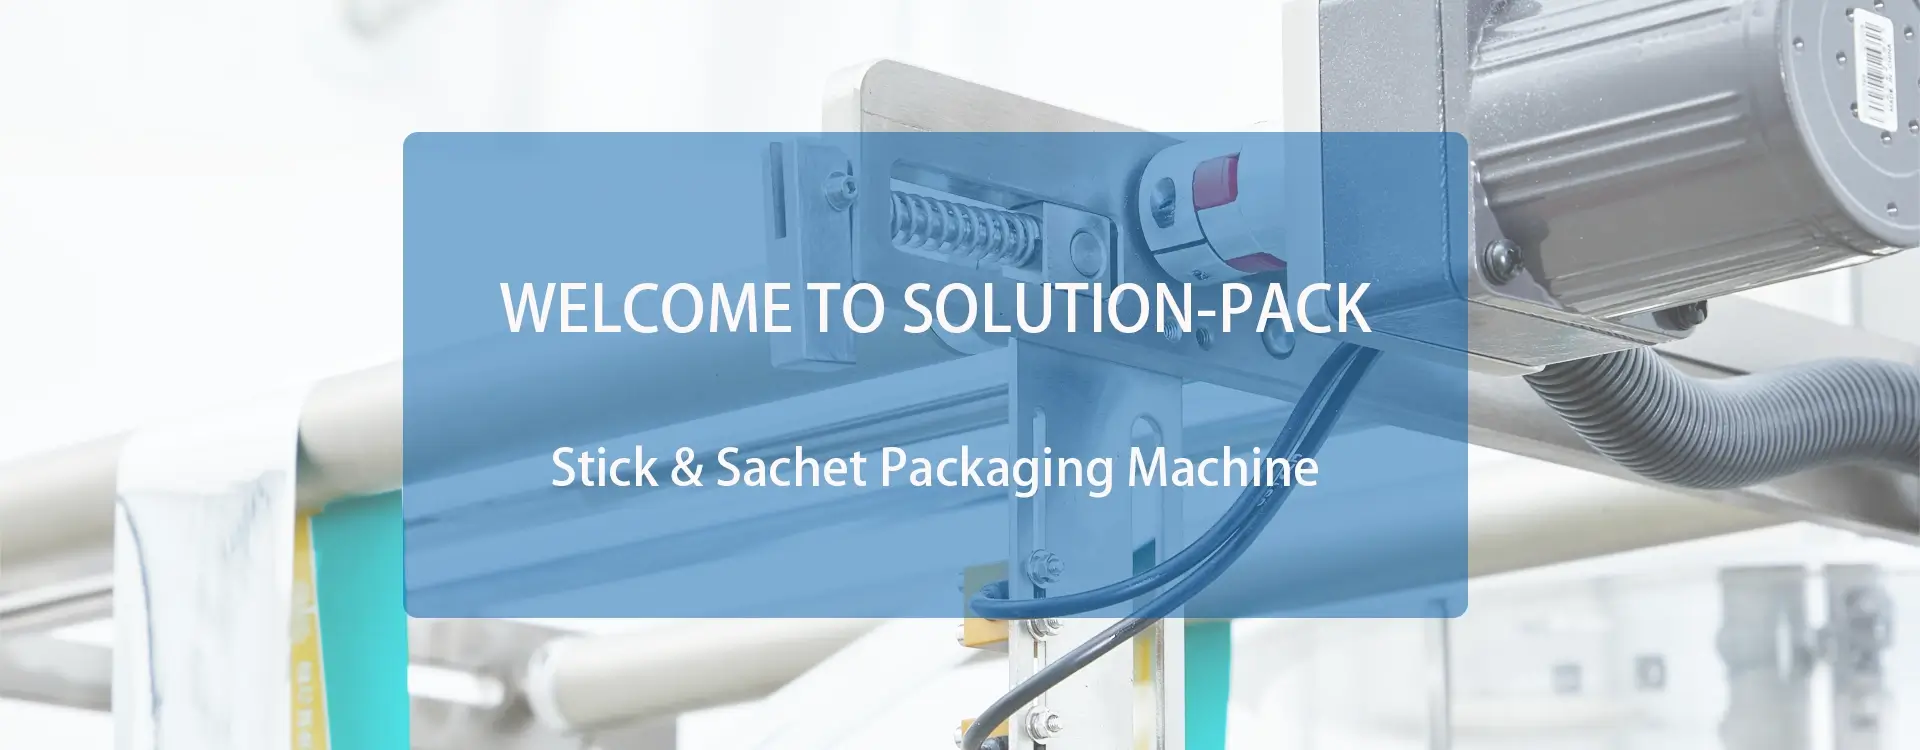 Model F4-100 Automatic 4-Side Seal Powder Sachet Packaging Machine Unit Bottom Banner Picture | Solution-Pack